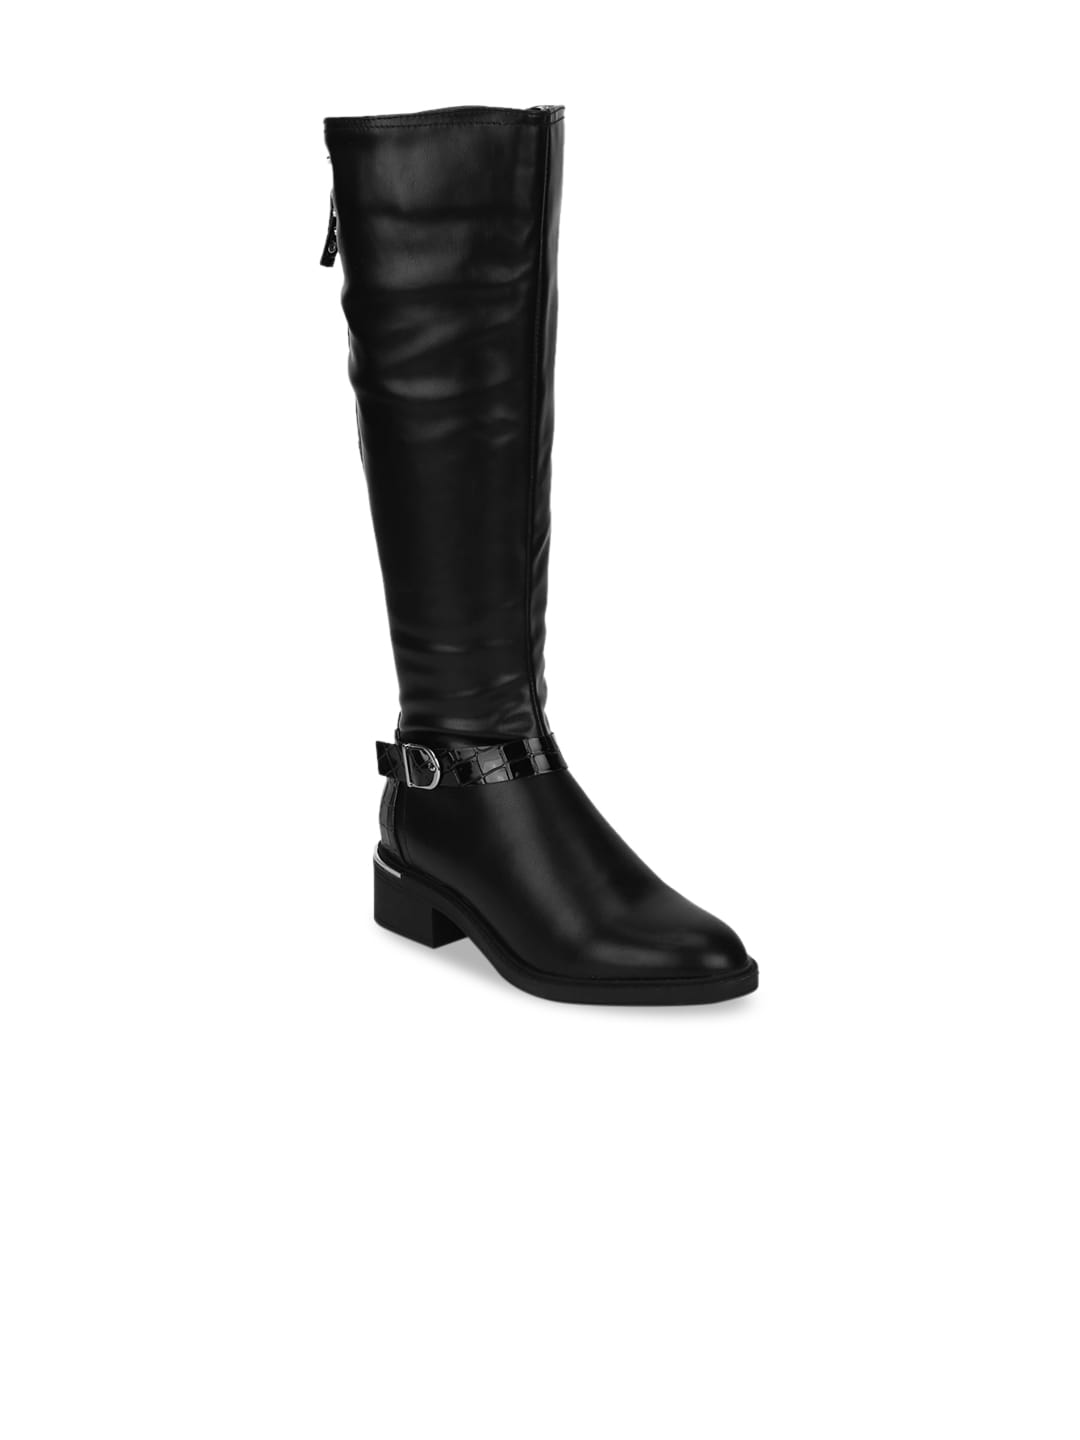 Truffle Collection Black Solid Block Heeled Boots with Buckles Price in India